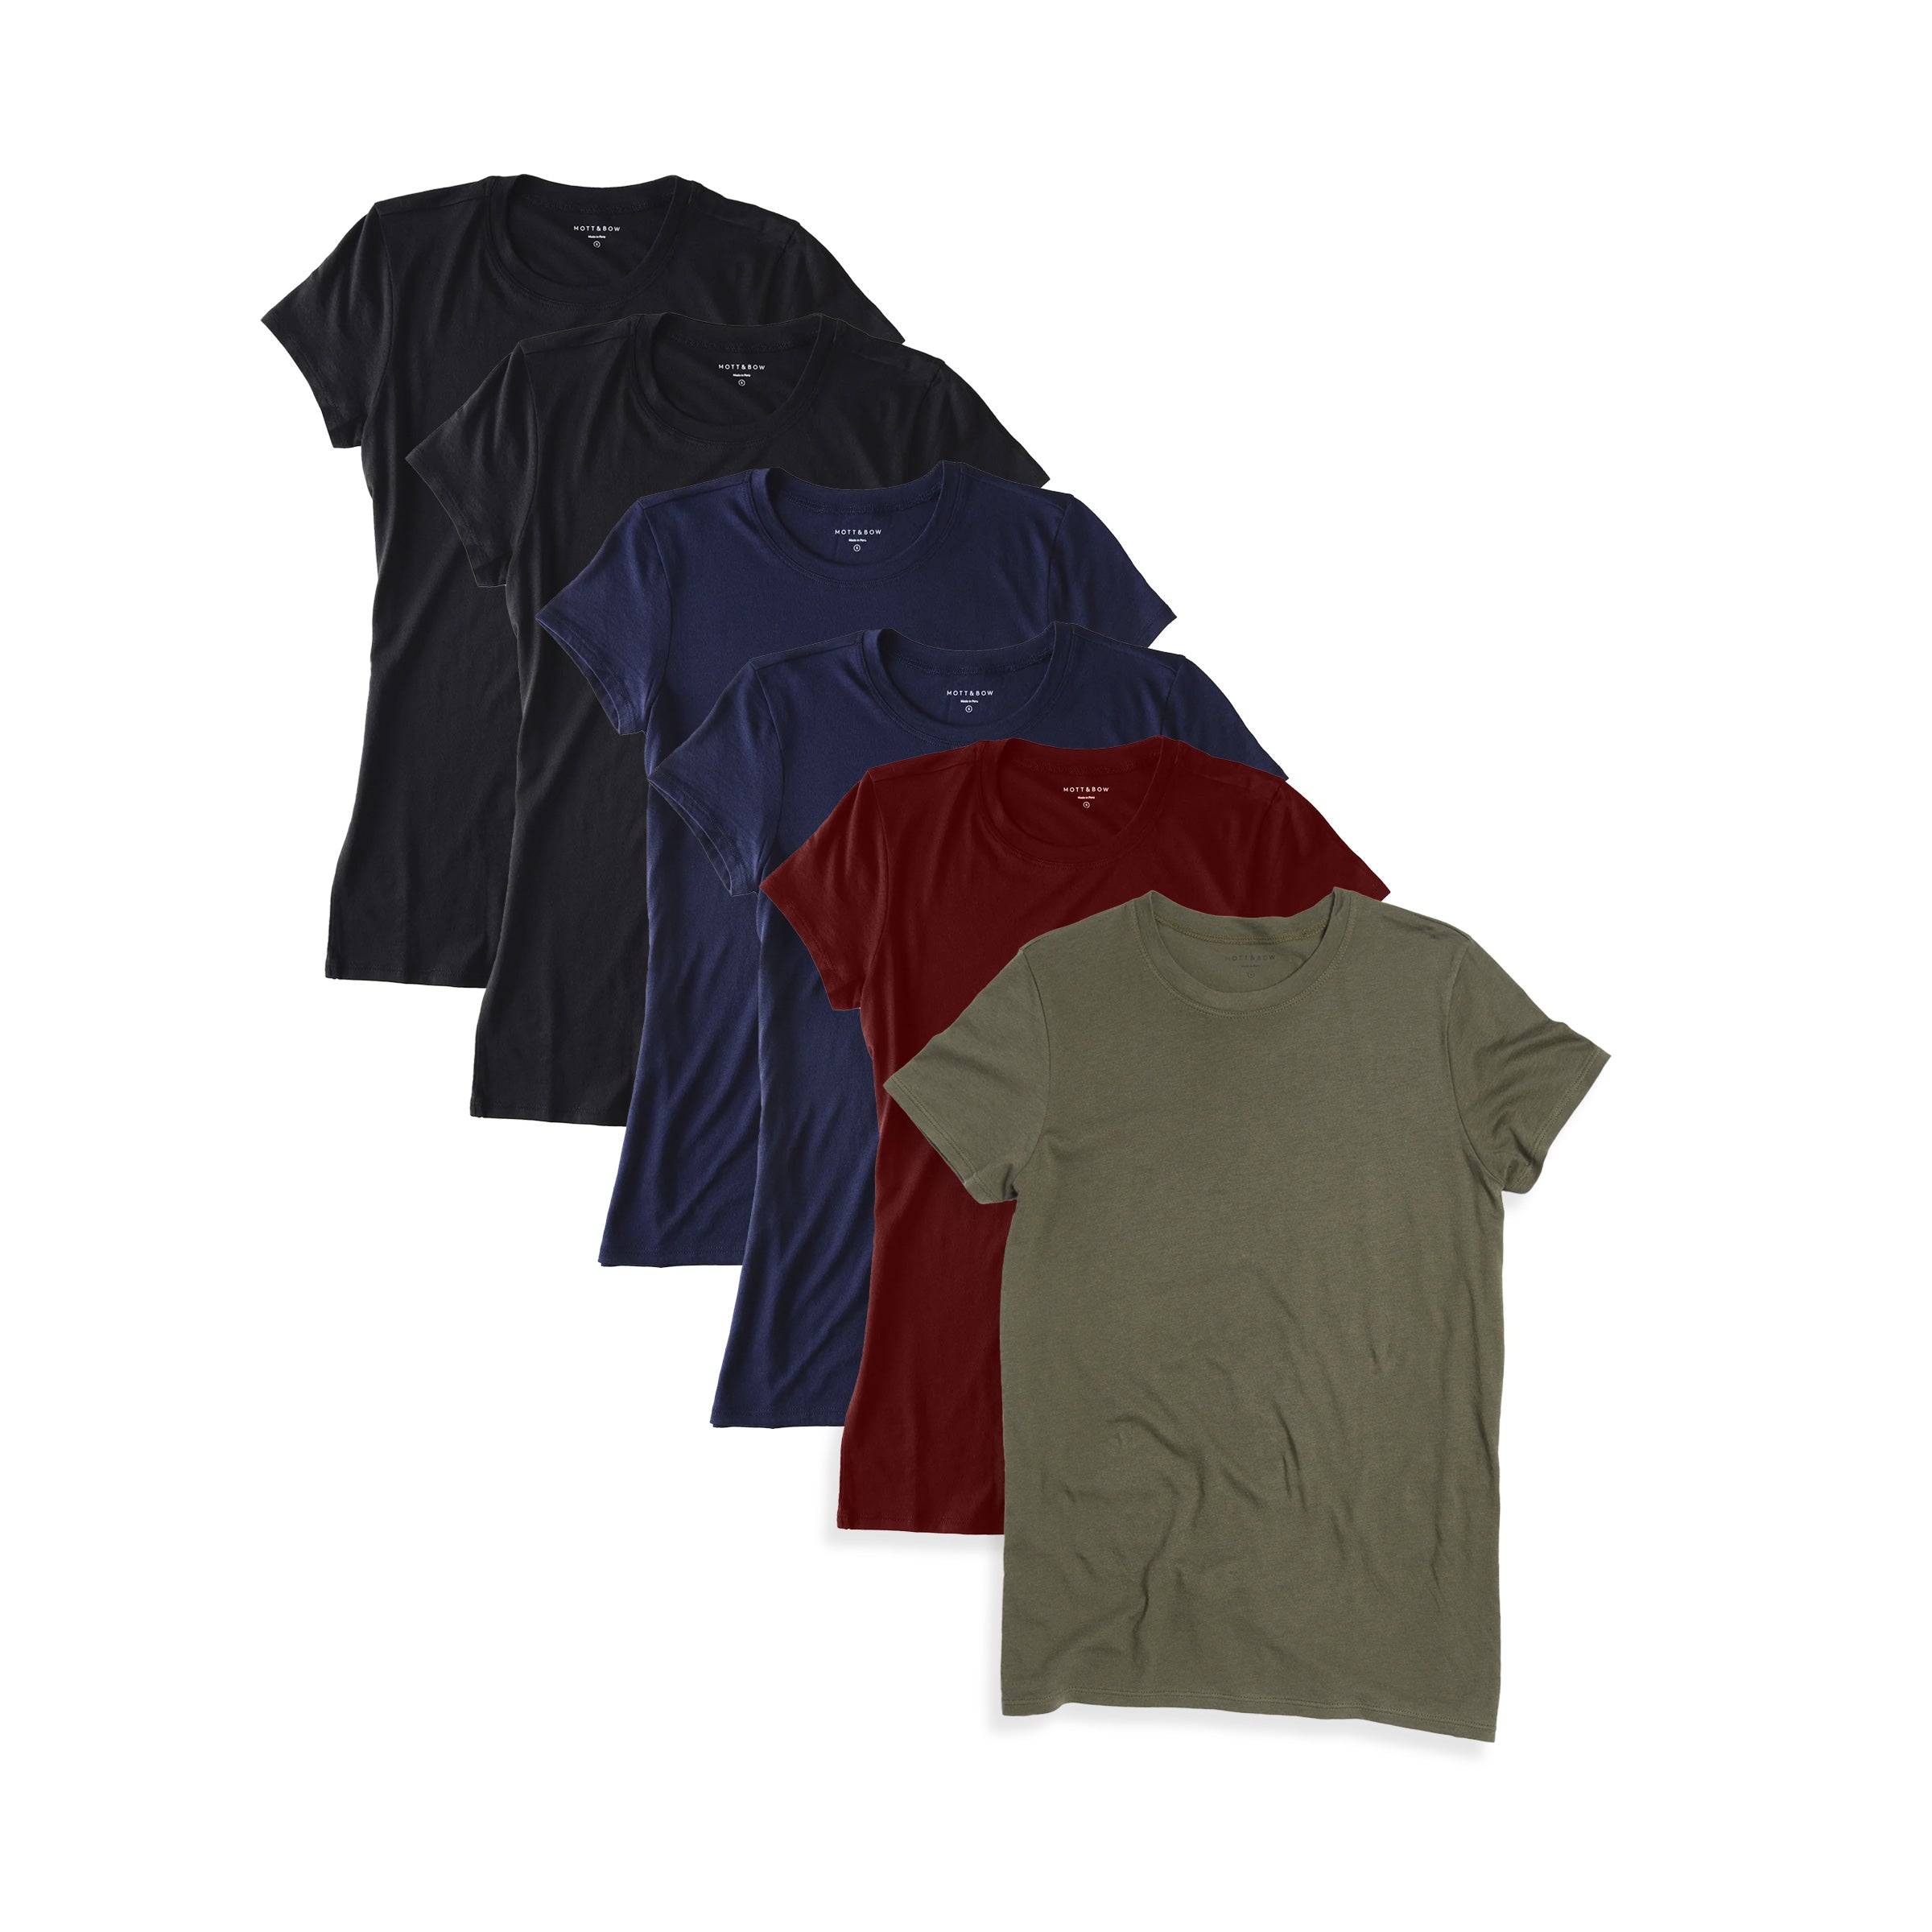 Women wearing Black/Navy/Crimson/Military Green Fitted Crew Marcy 6-Pack tees